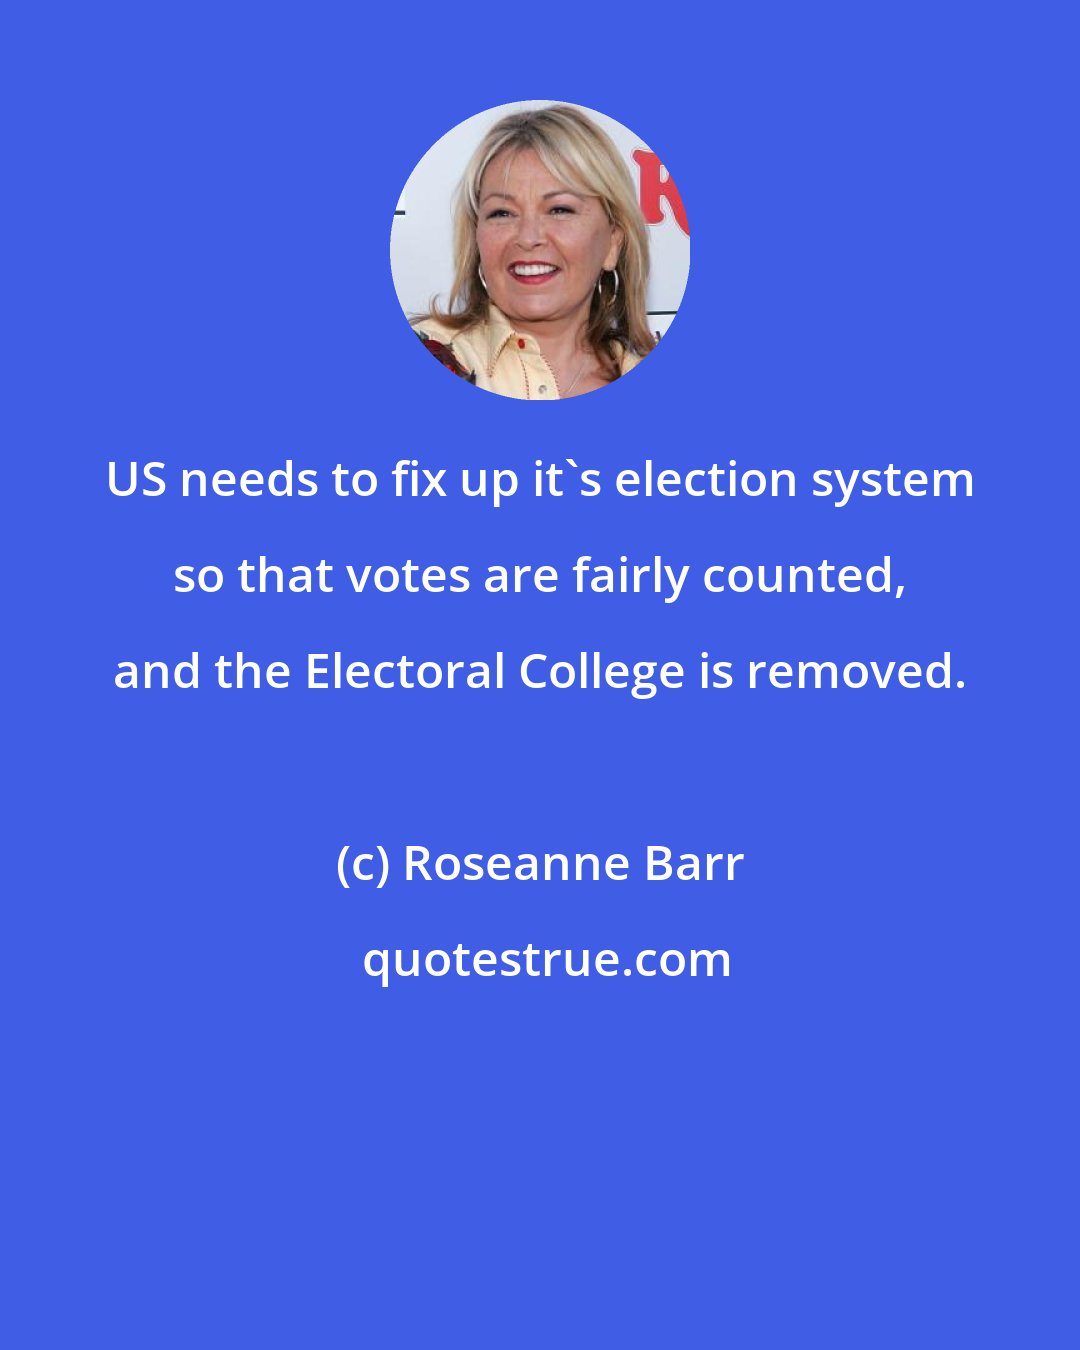 Roseanne Barr: US needs to fix up it's election system so that votes are fairly counted, and the Electoral College is removed.